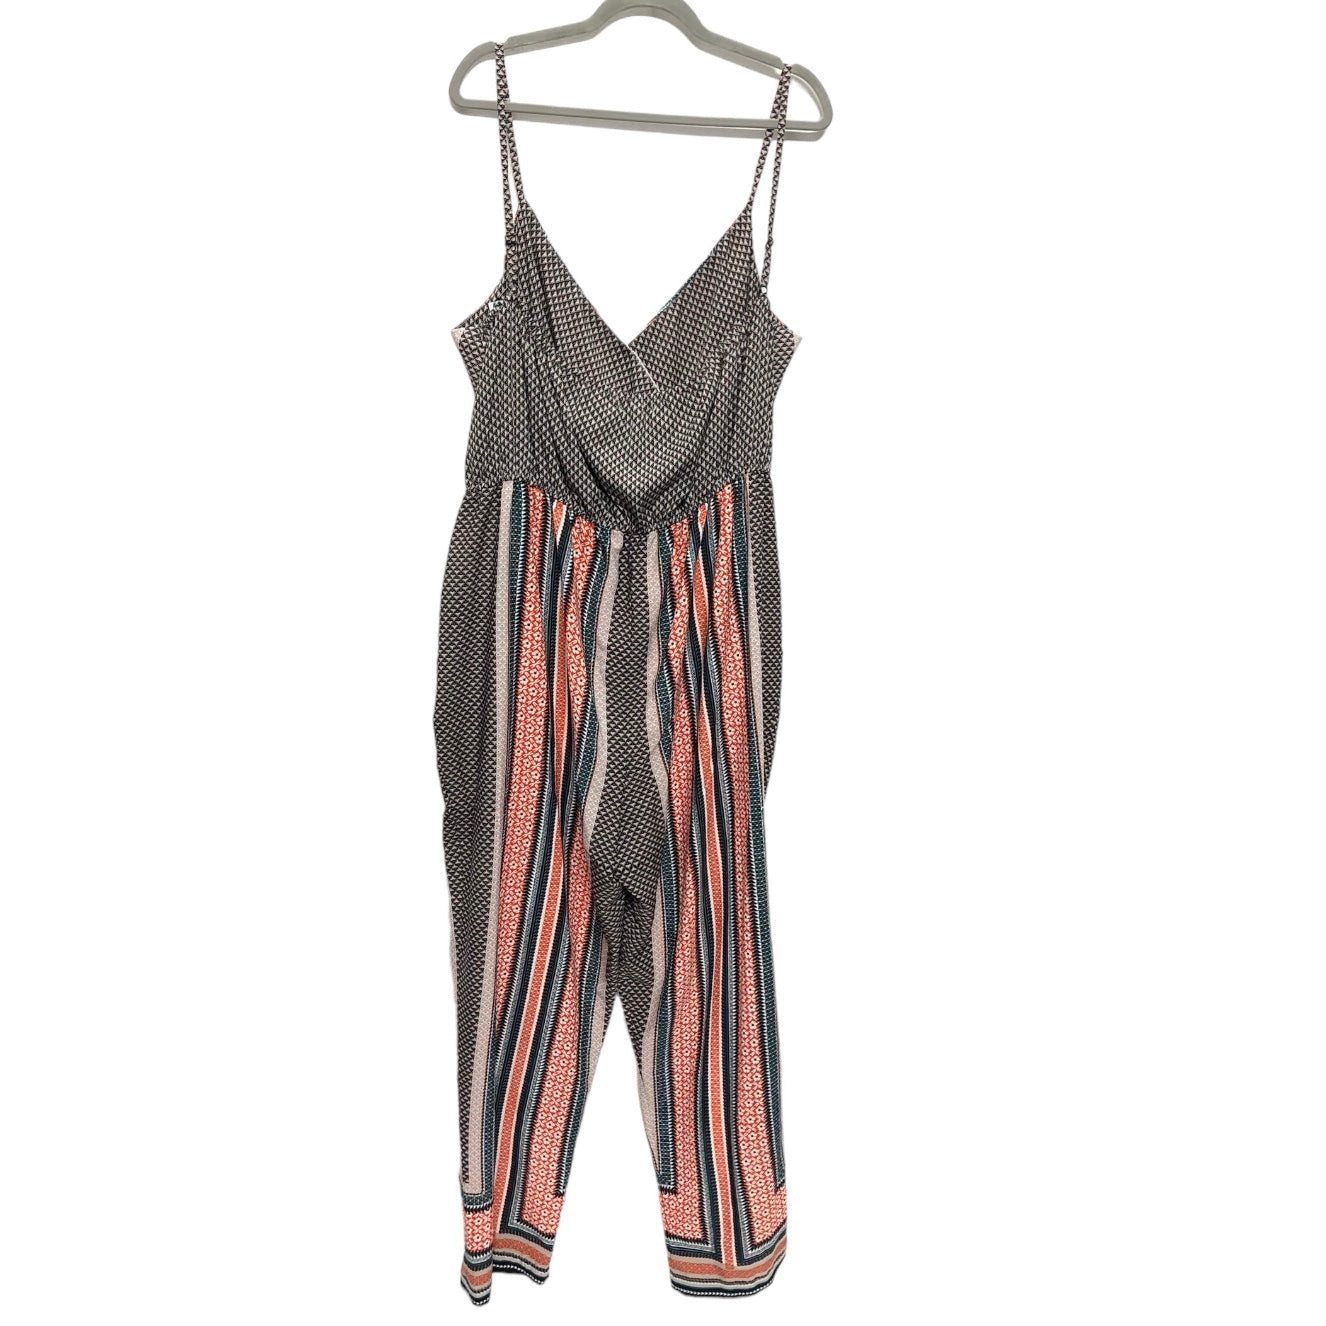 Multi-colored Jumpsuit Forever 21, Size 3x